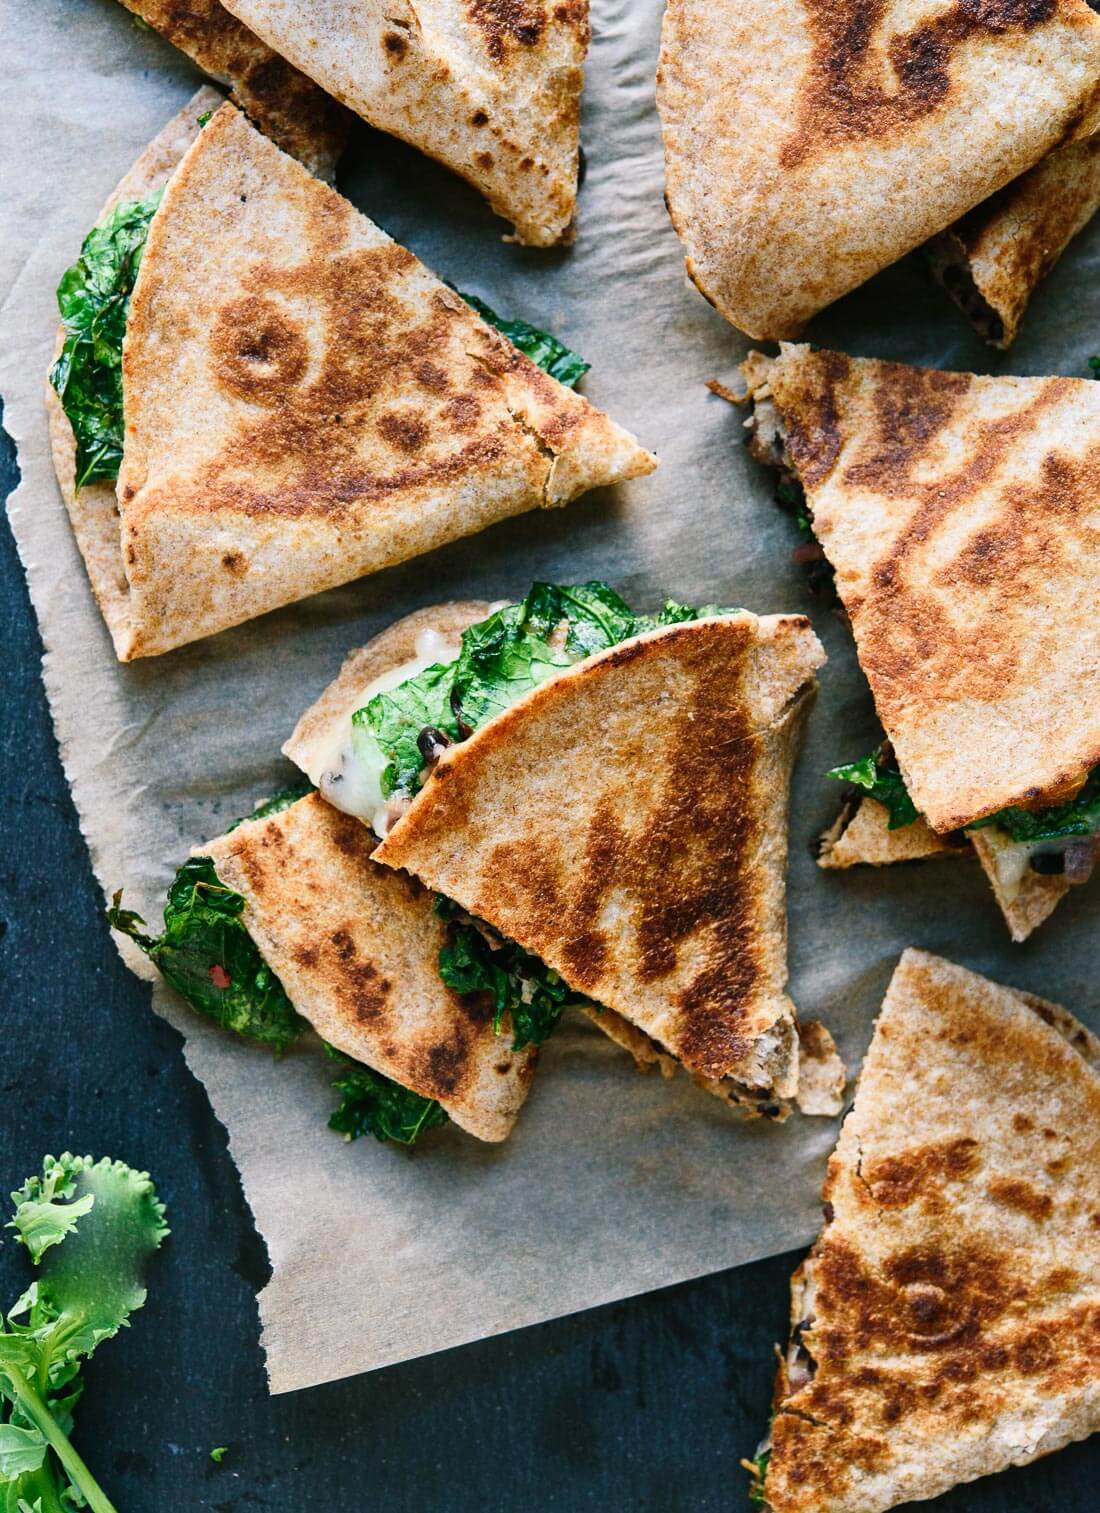 Crispy quesadillas stuffed with broccoli rabe and black beans! cookieandkate.com